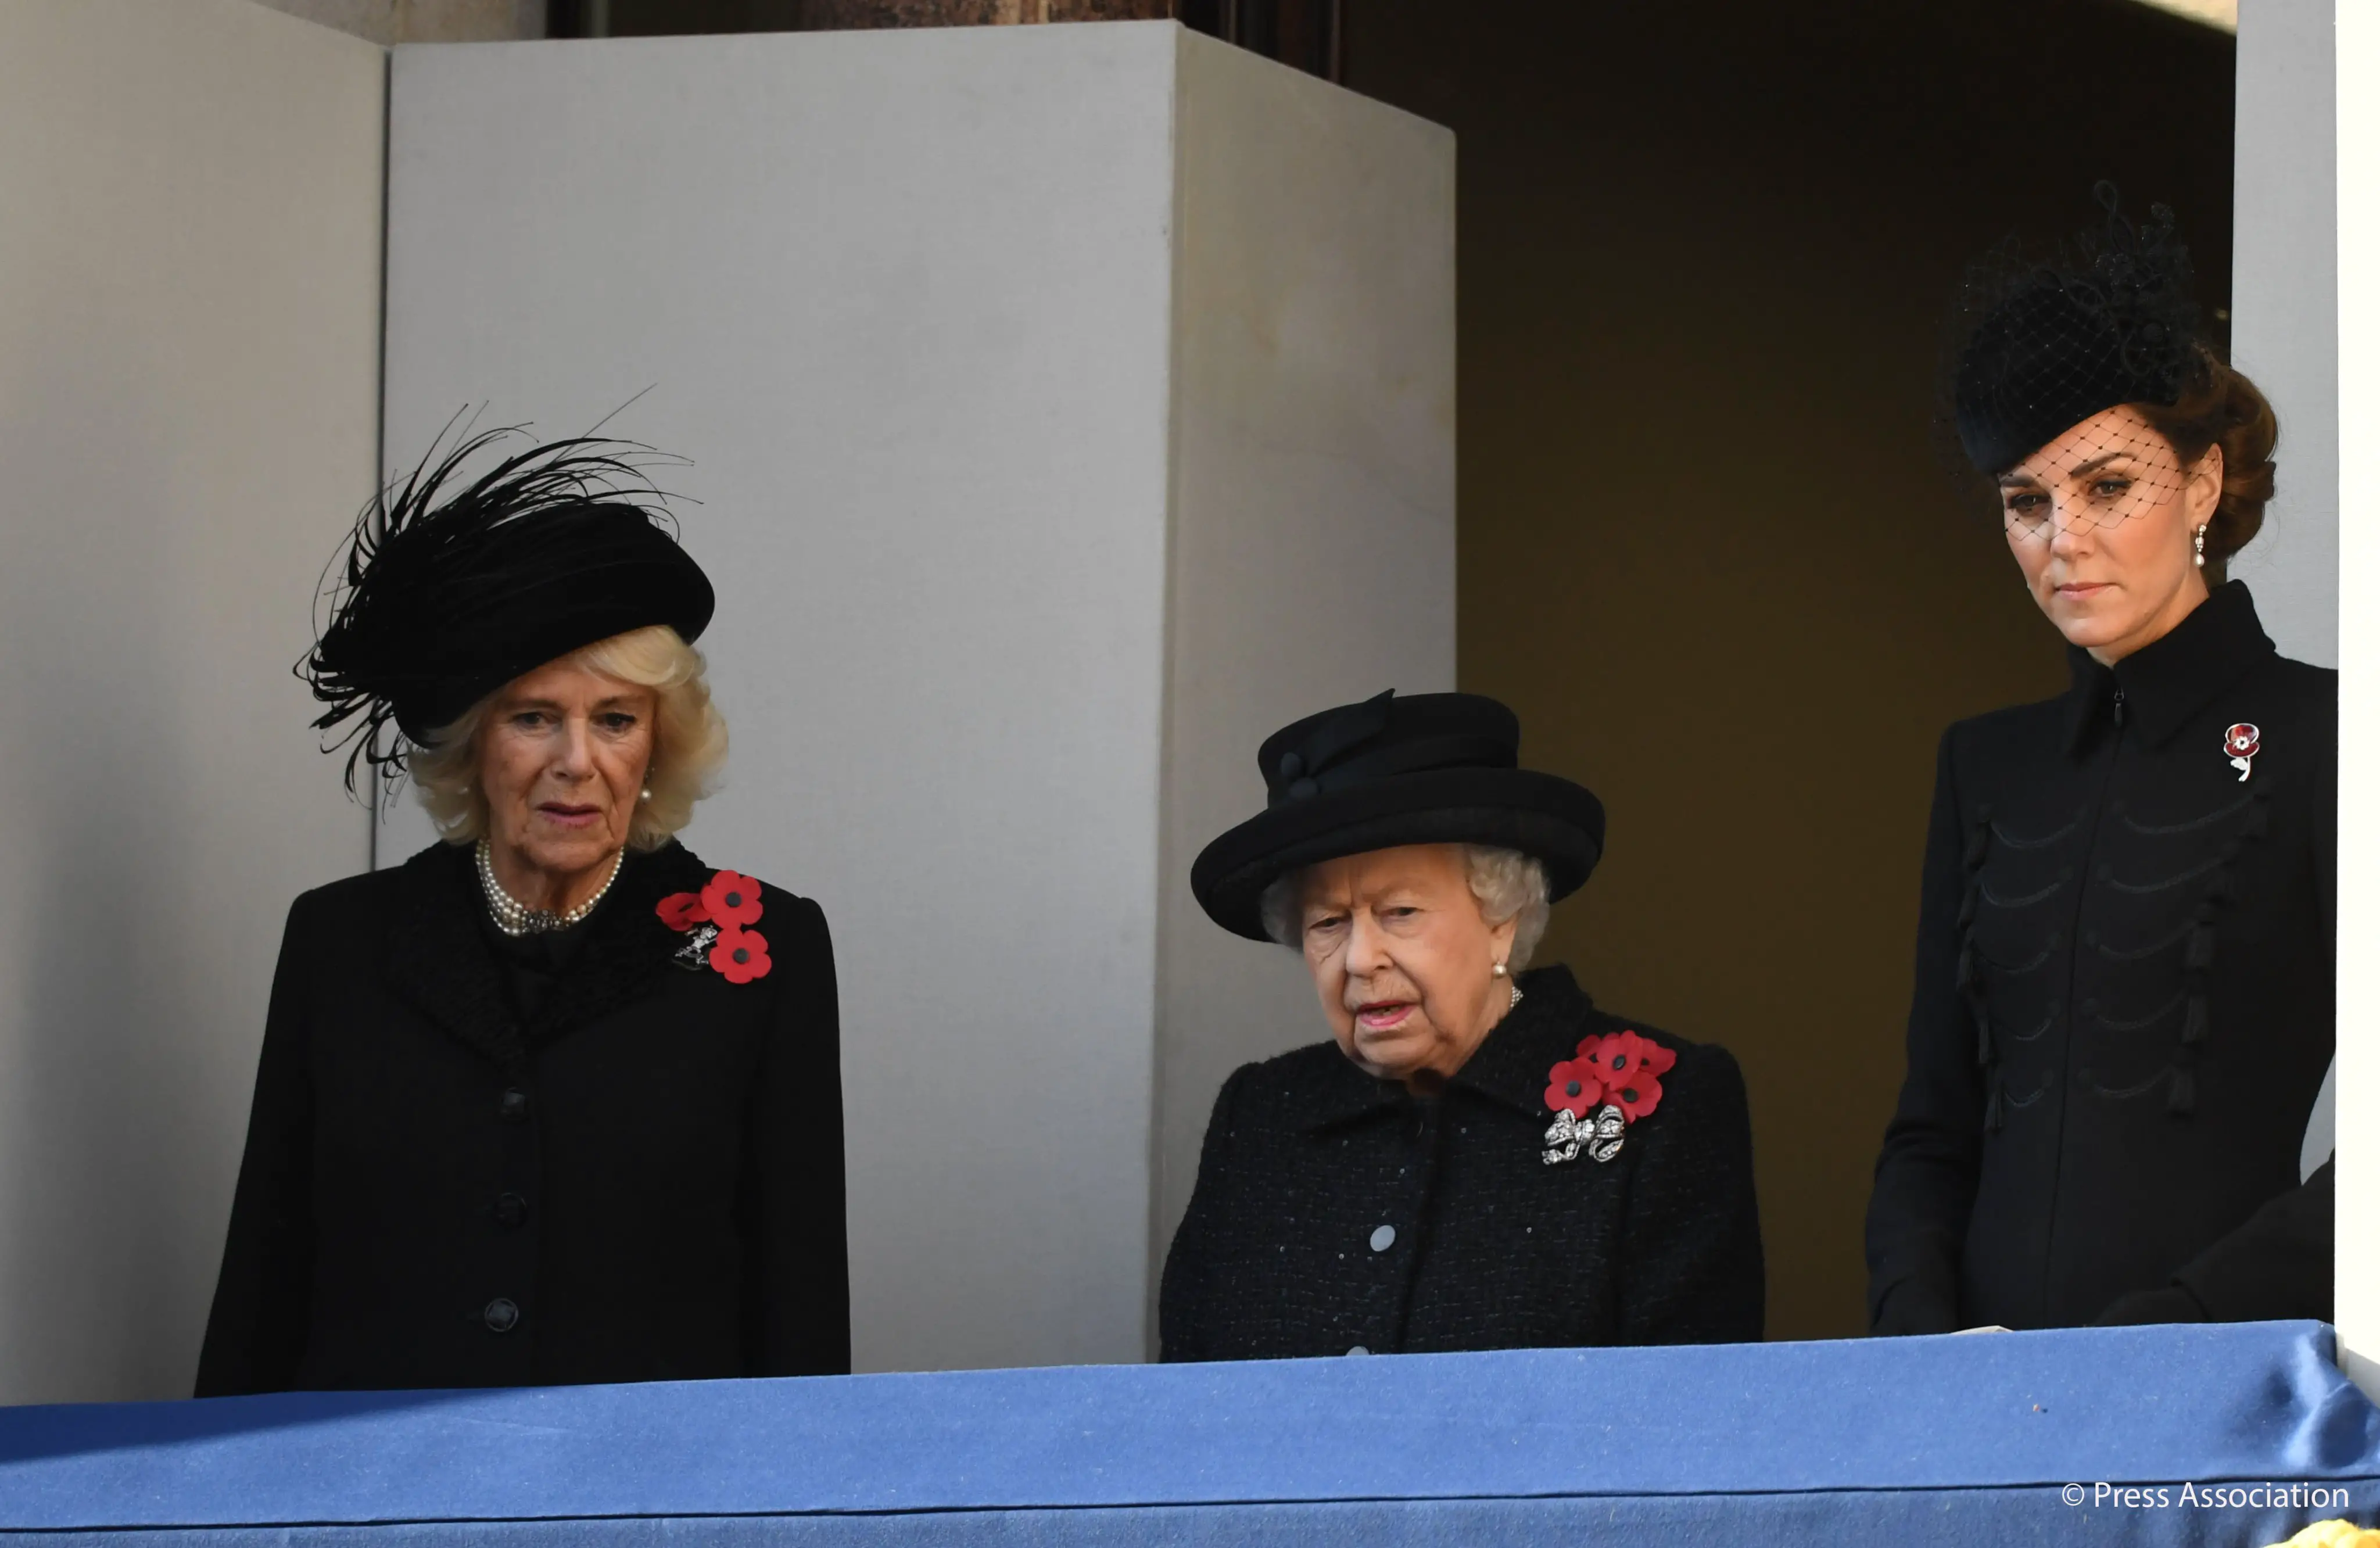 The Duchess of Cambridge at the remembrande day service in 2019 with The Queen and The Duchess of Cornwall